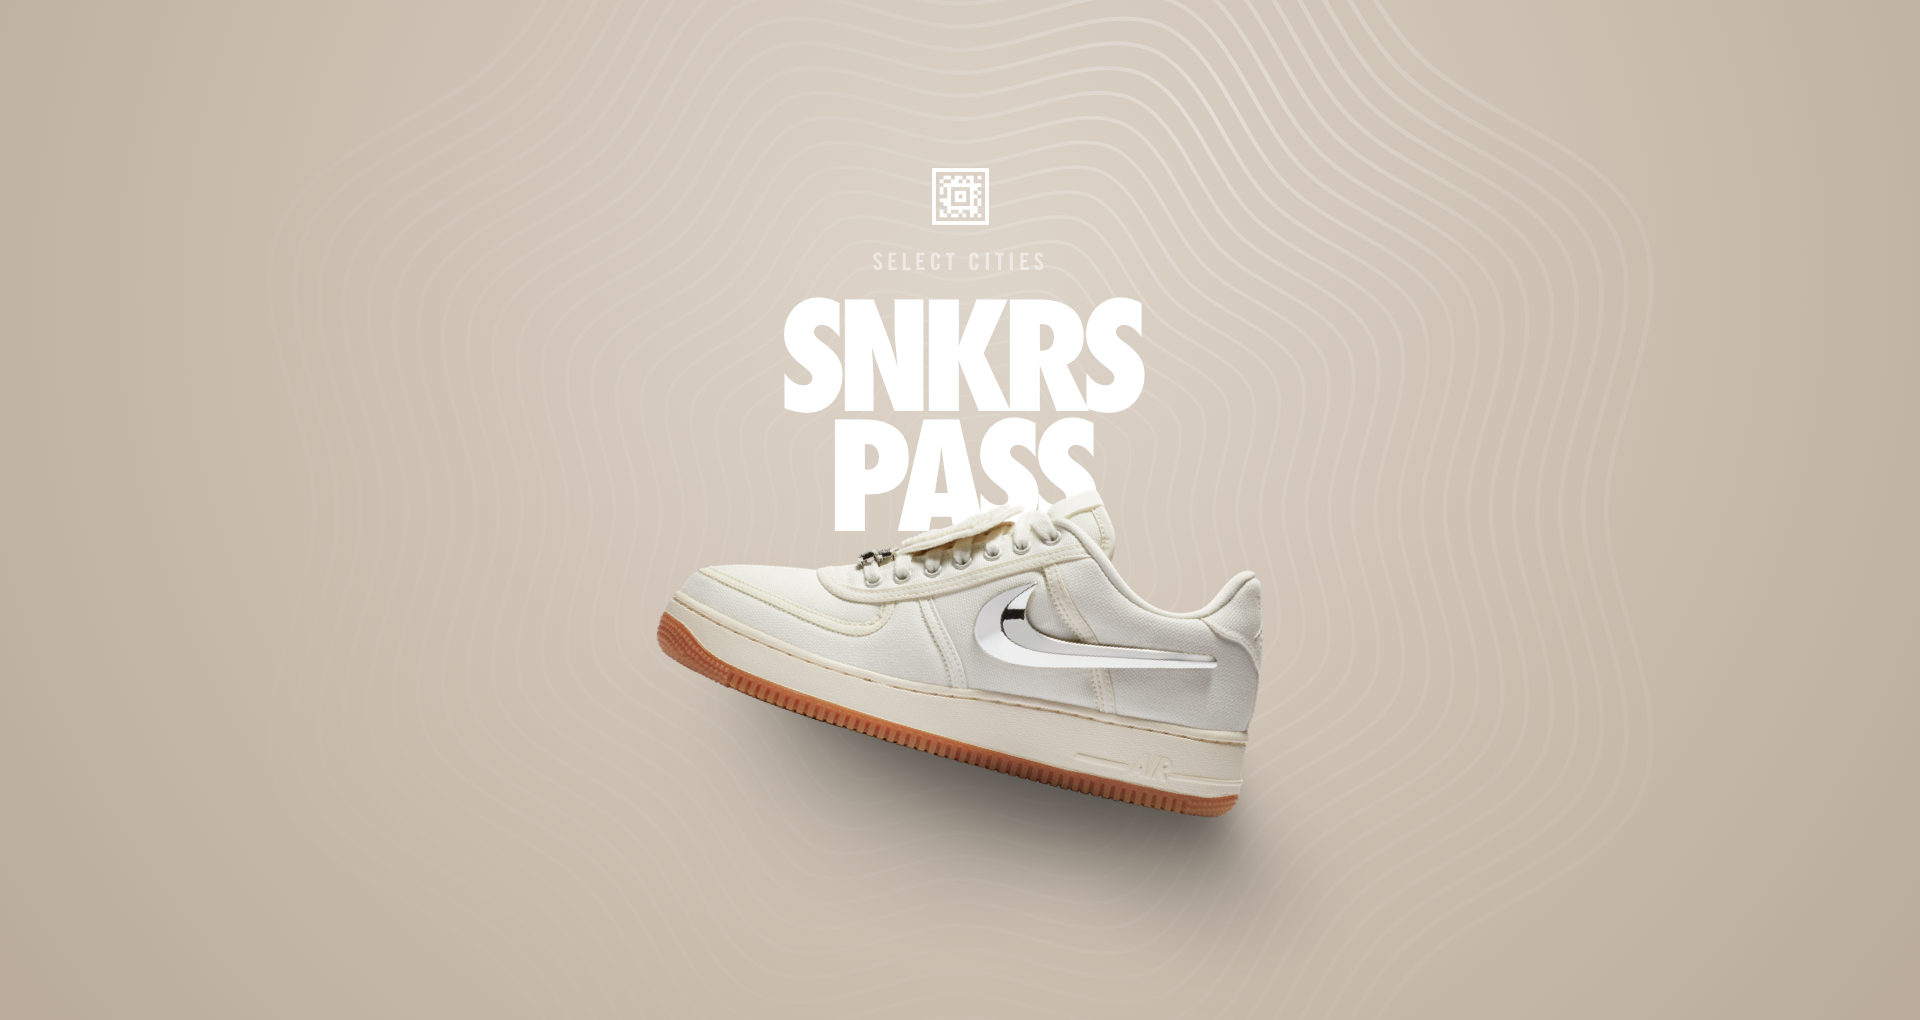 Nike Air Force 1 Low 'Travis Scott' SNKRS Pass Select Cites. Nike SNKRS